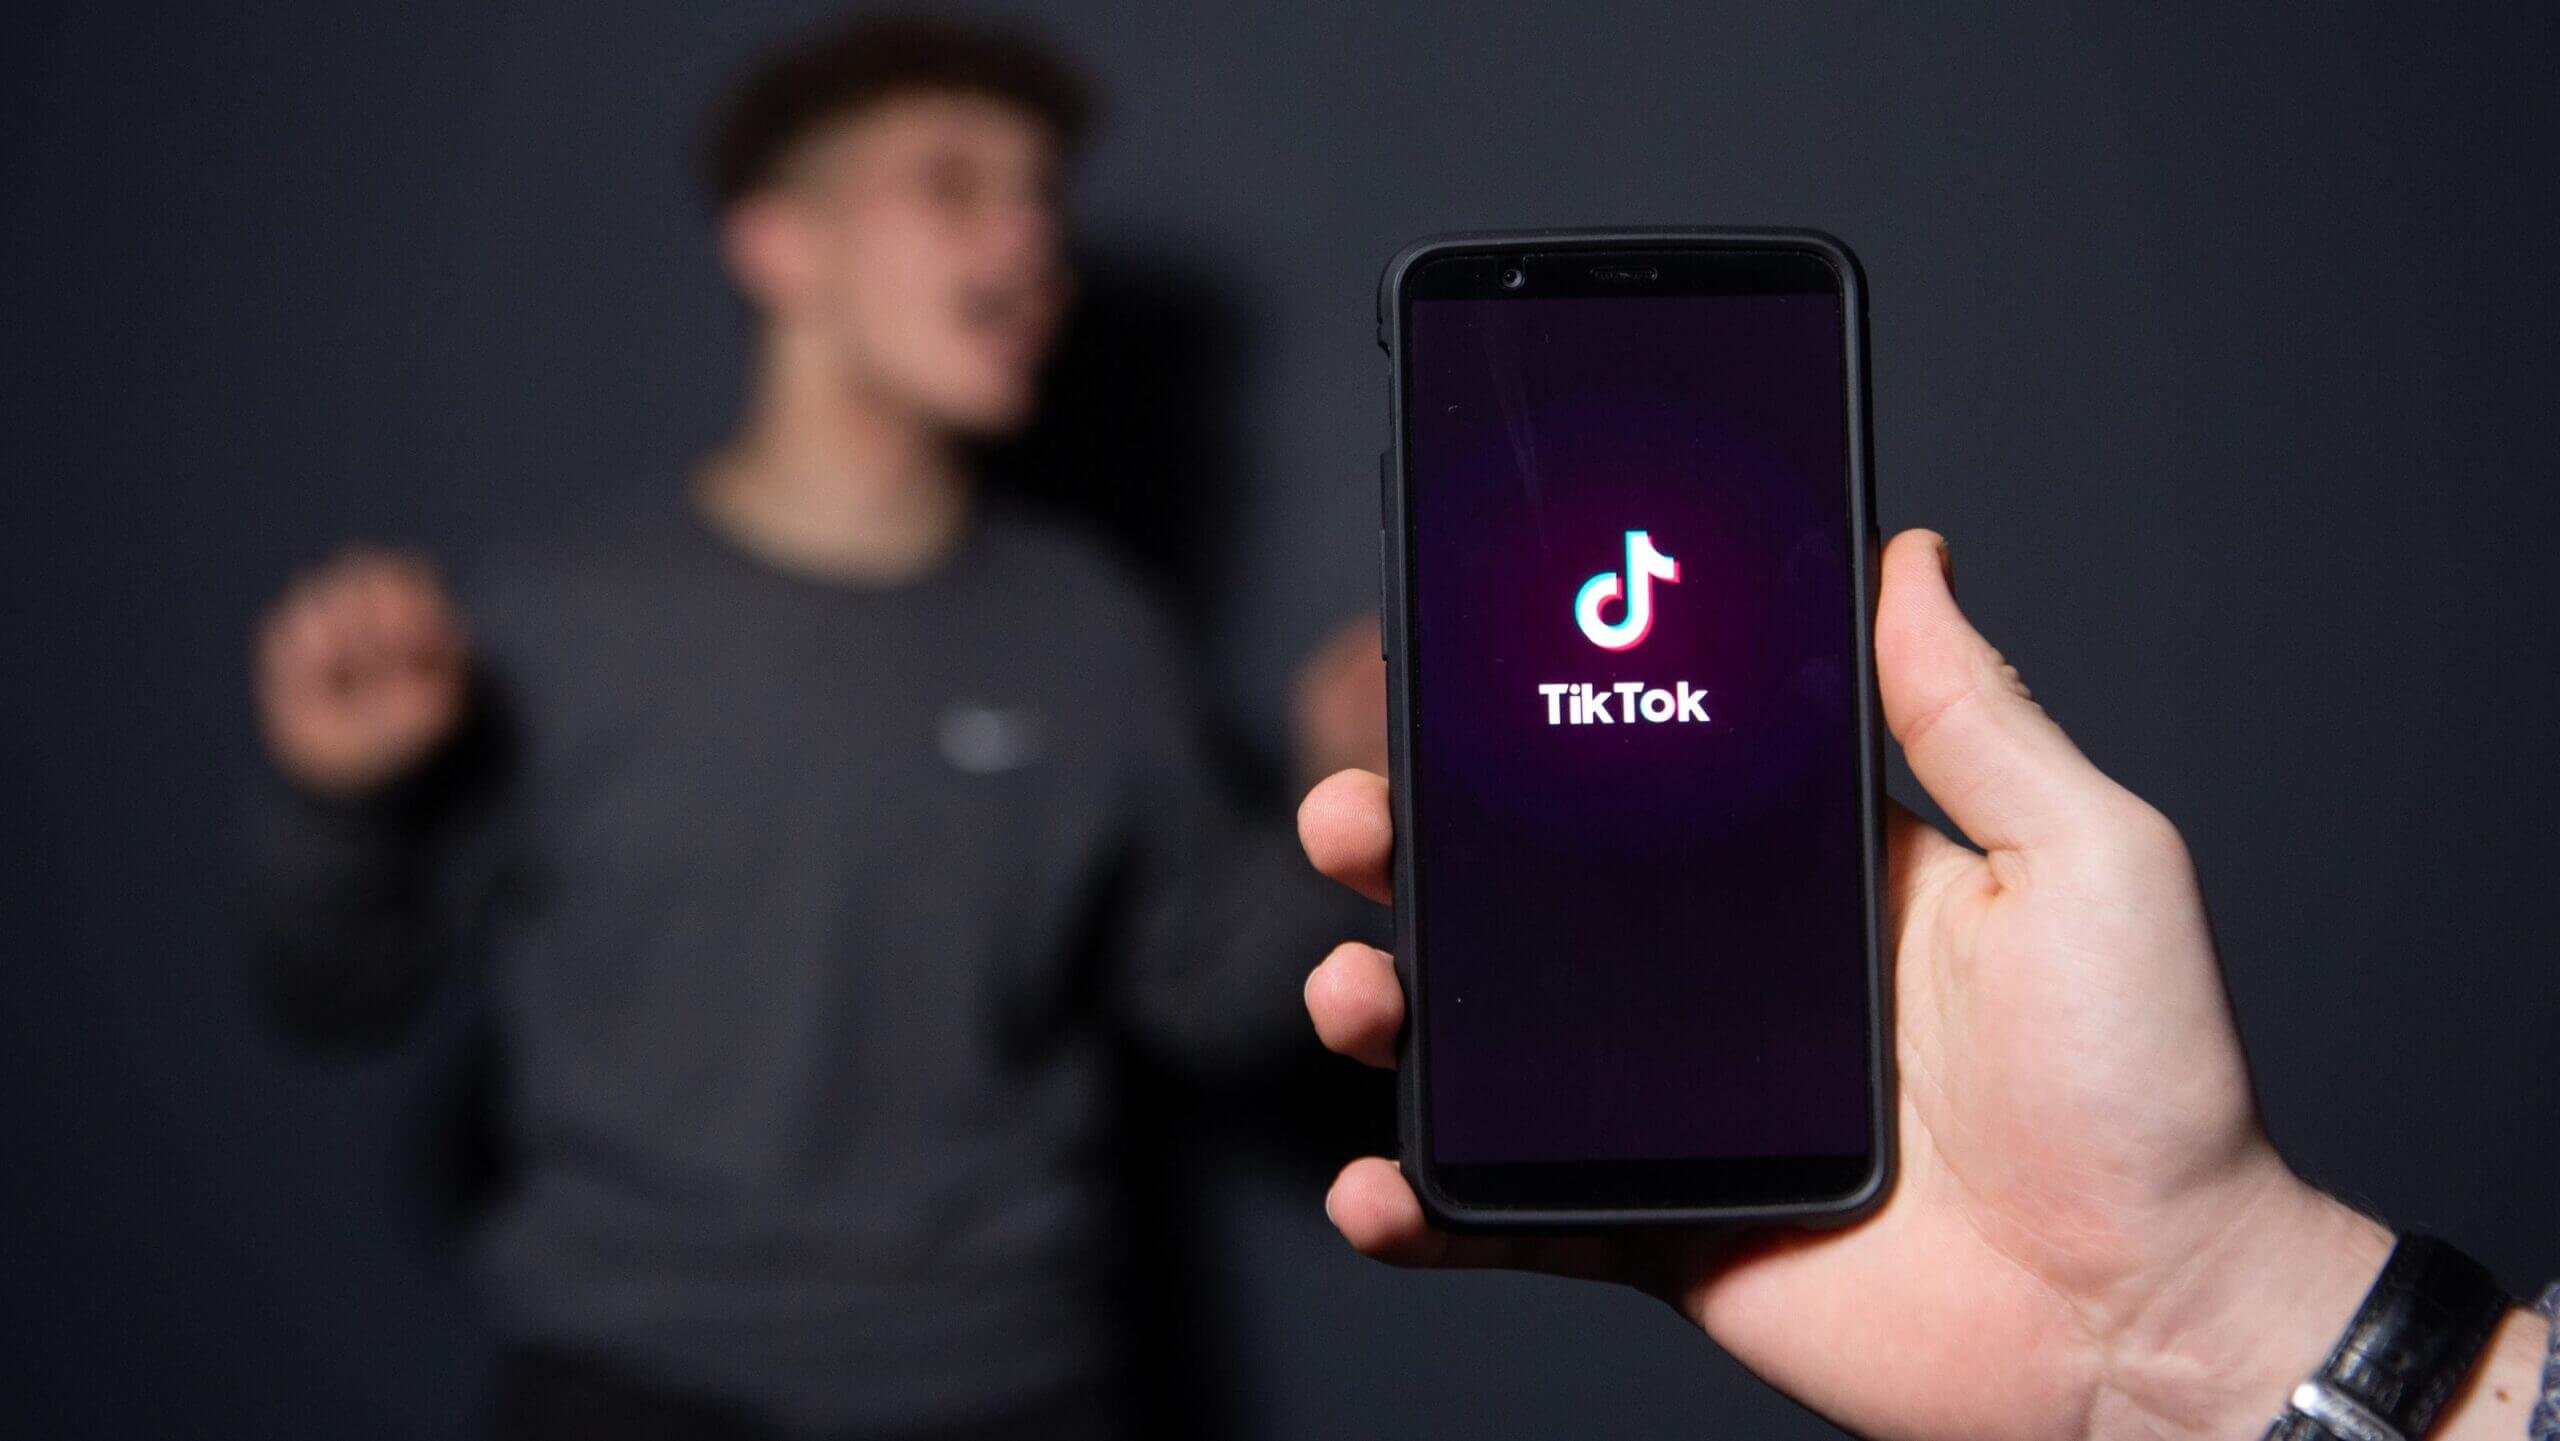 Tik Tok app open on mobile background a person standing